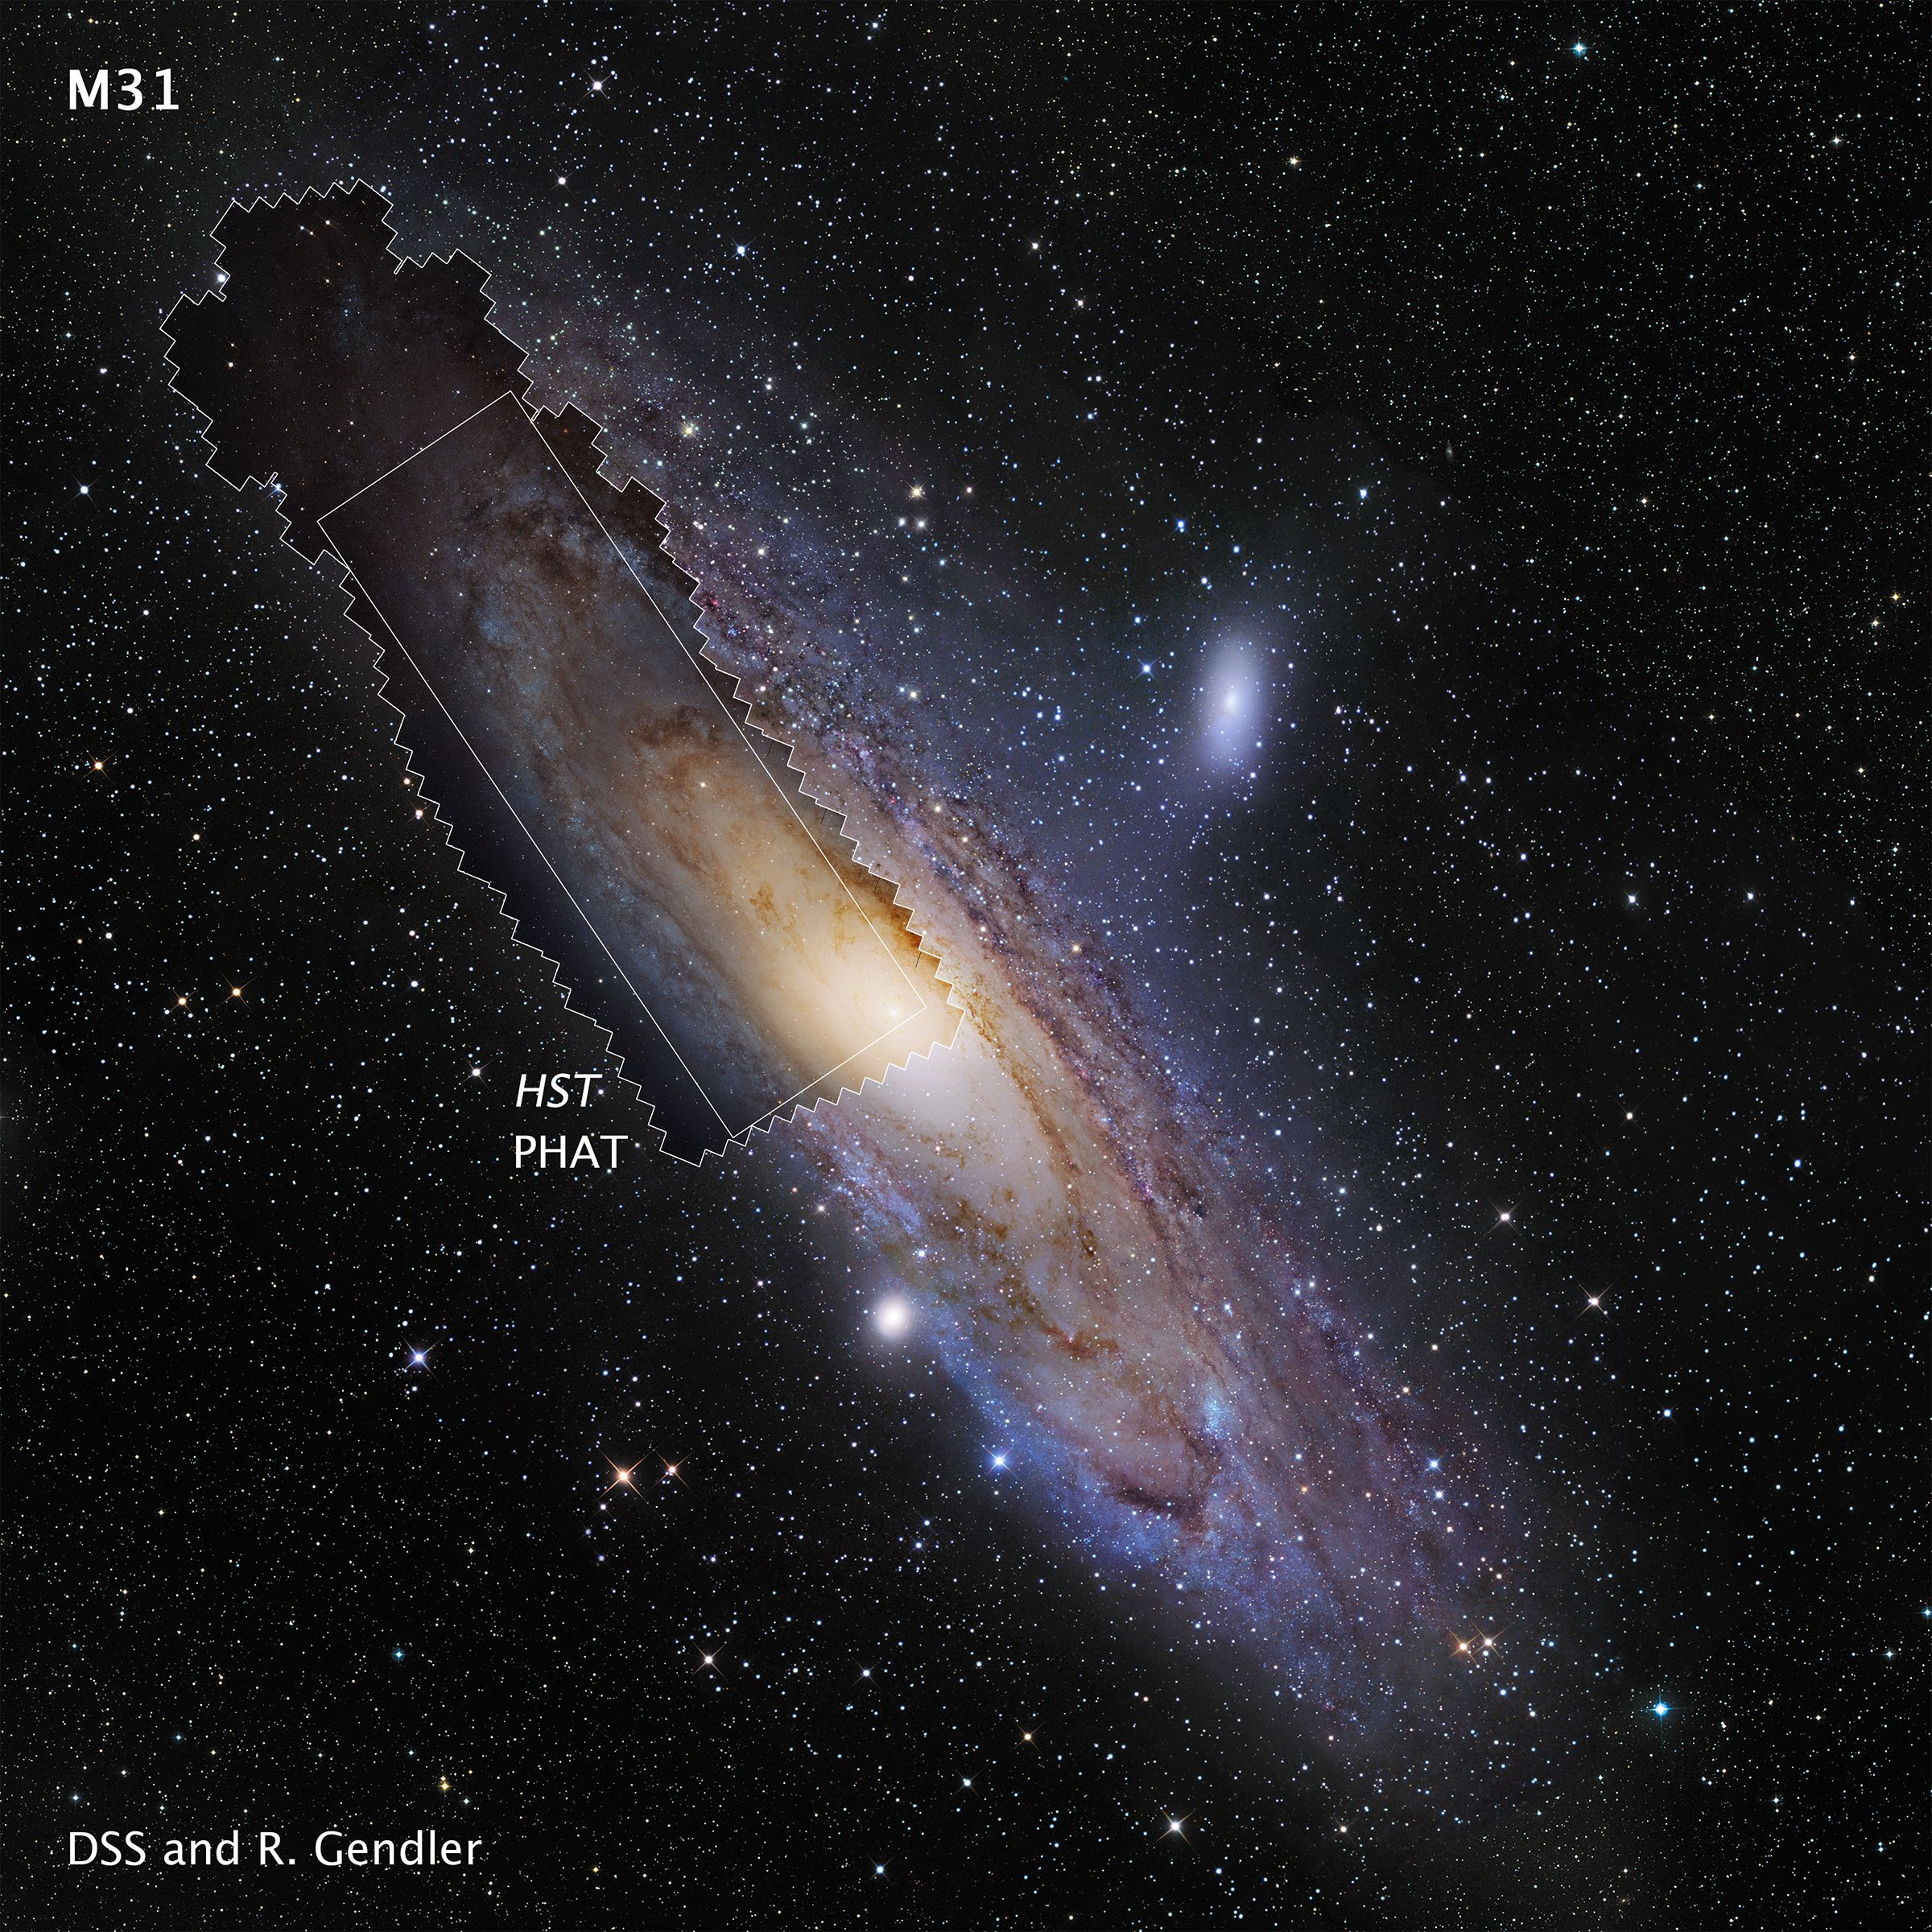 Messier 31 (The Andromeda Galaxy)